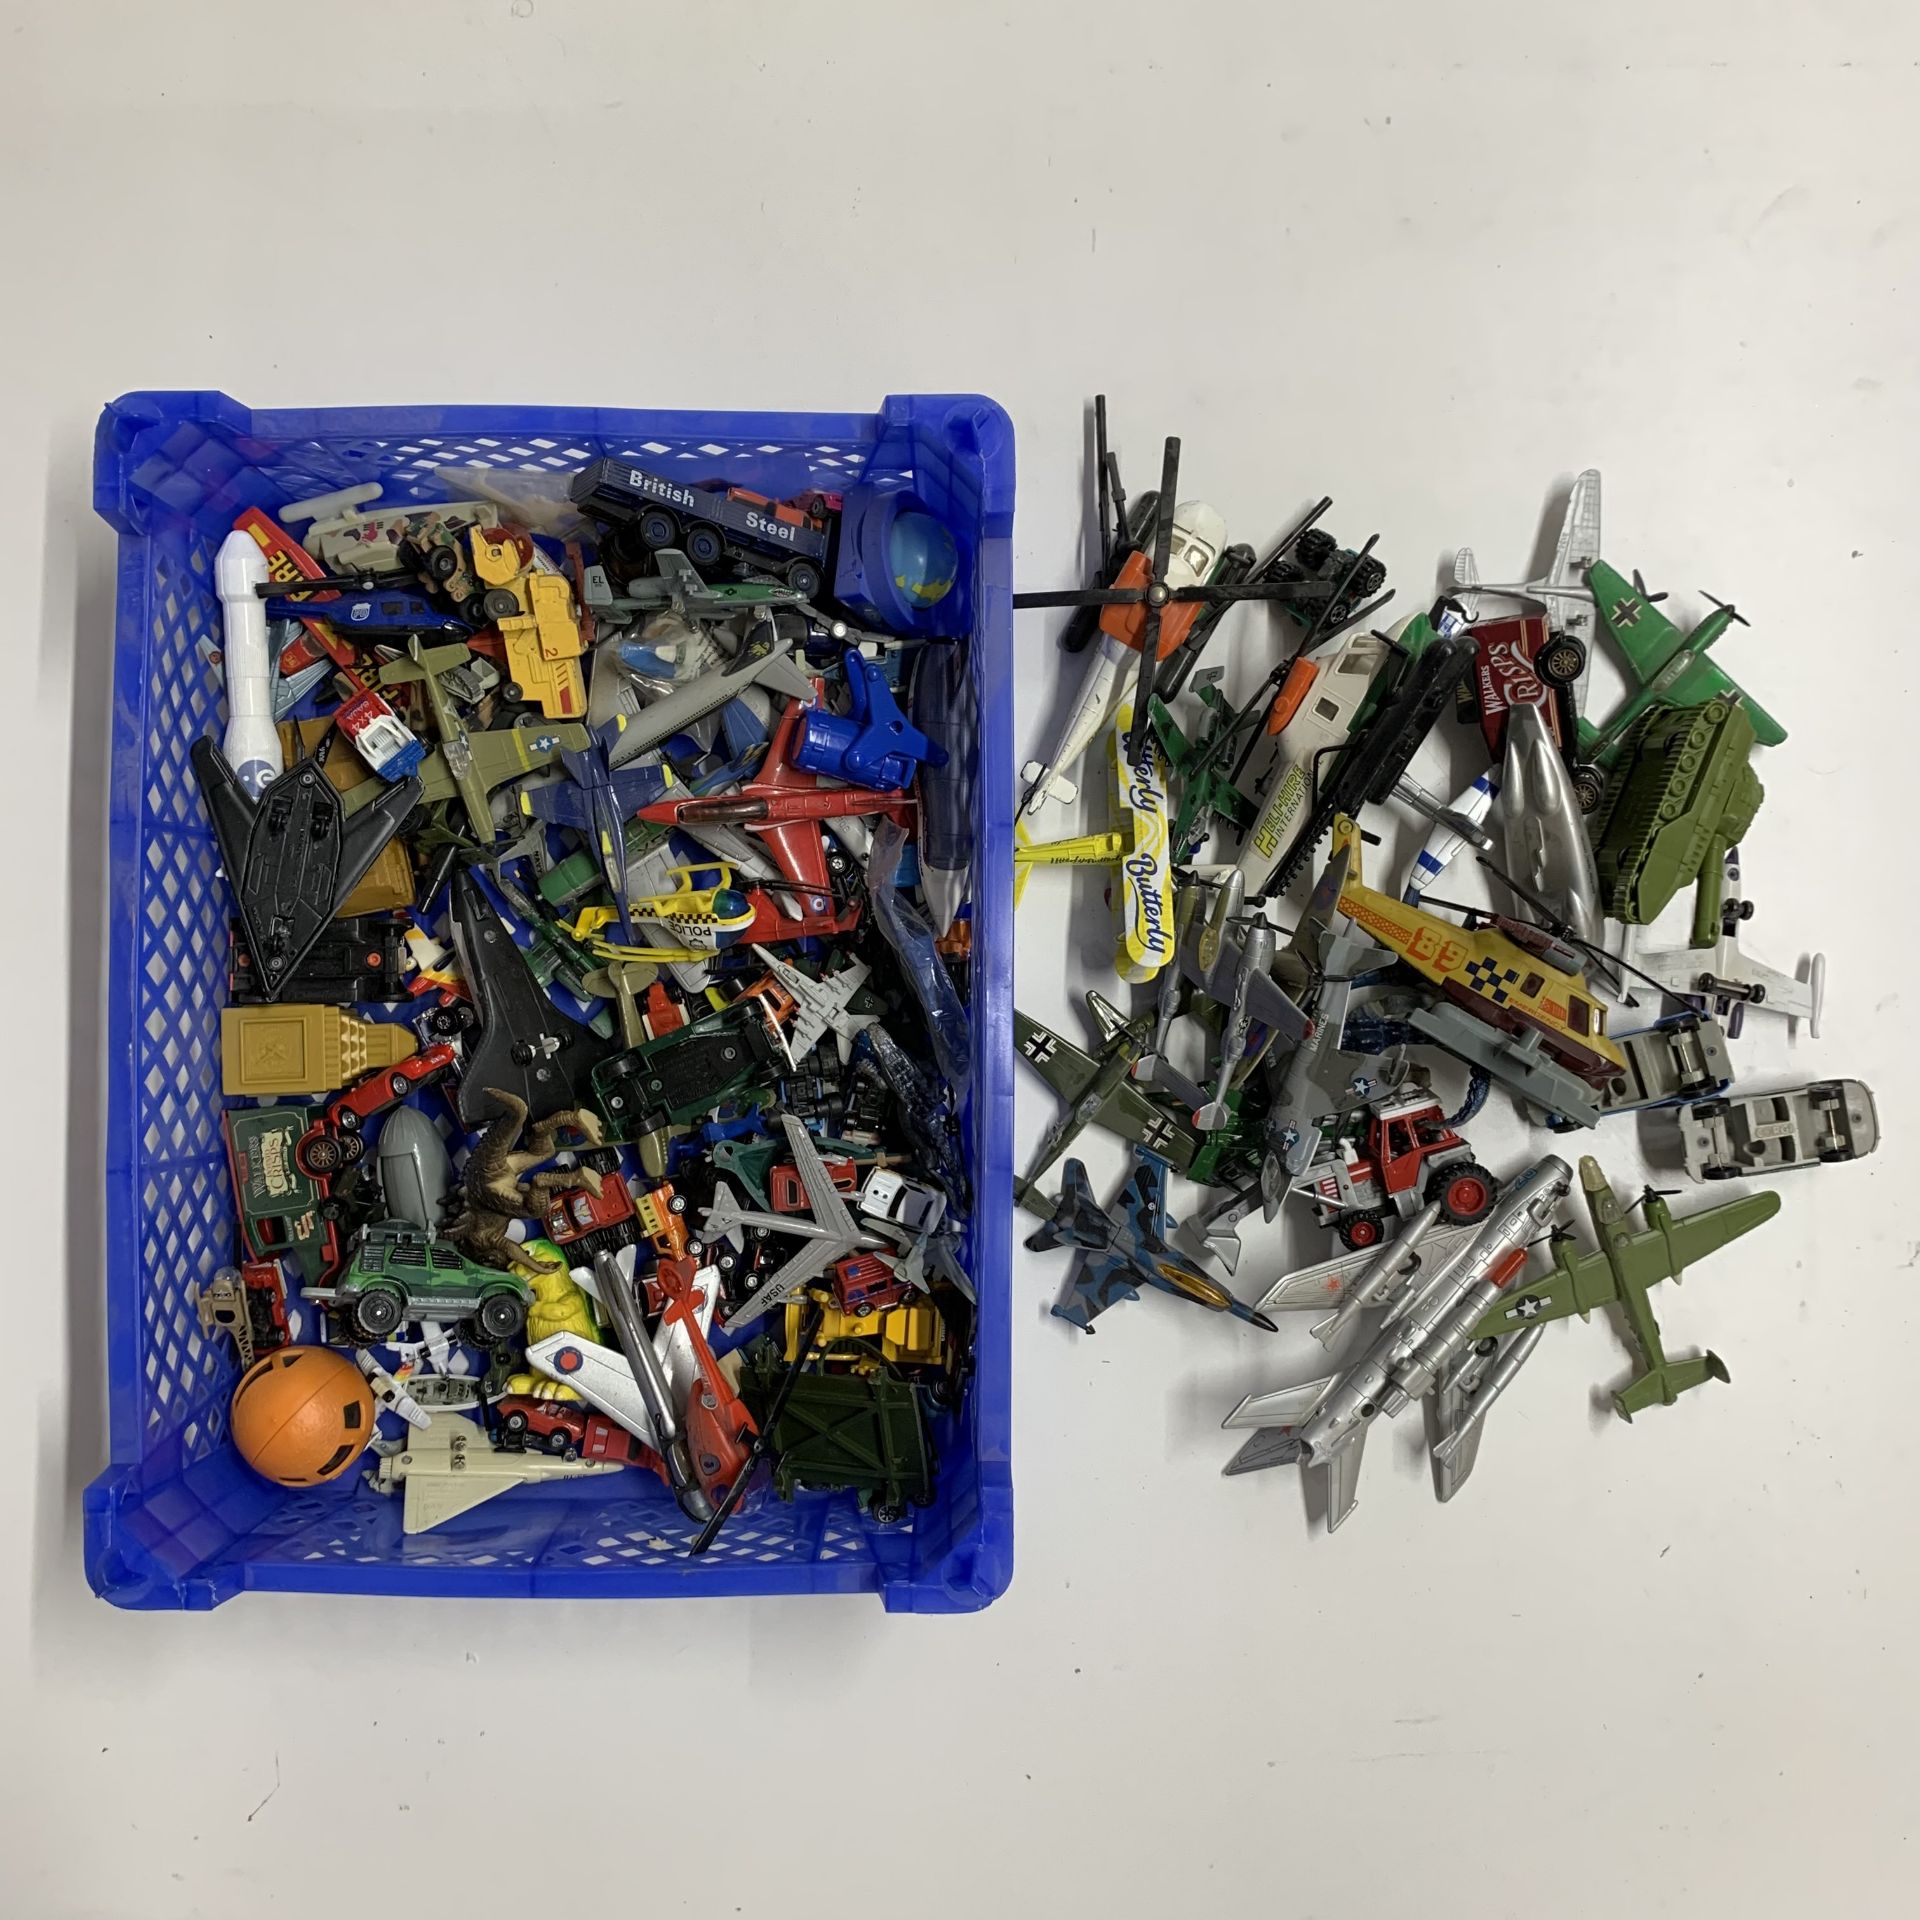 A quantity of various die cast and plastic model planes and vehicles.